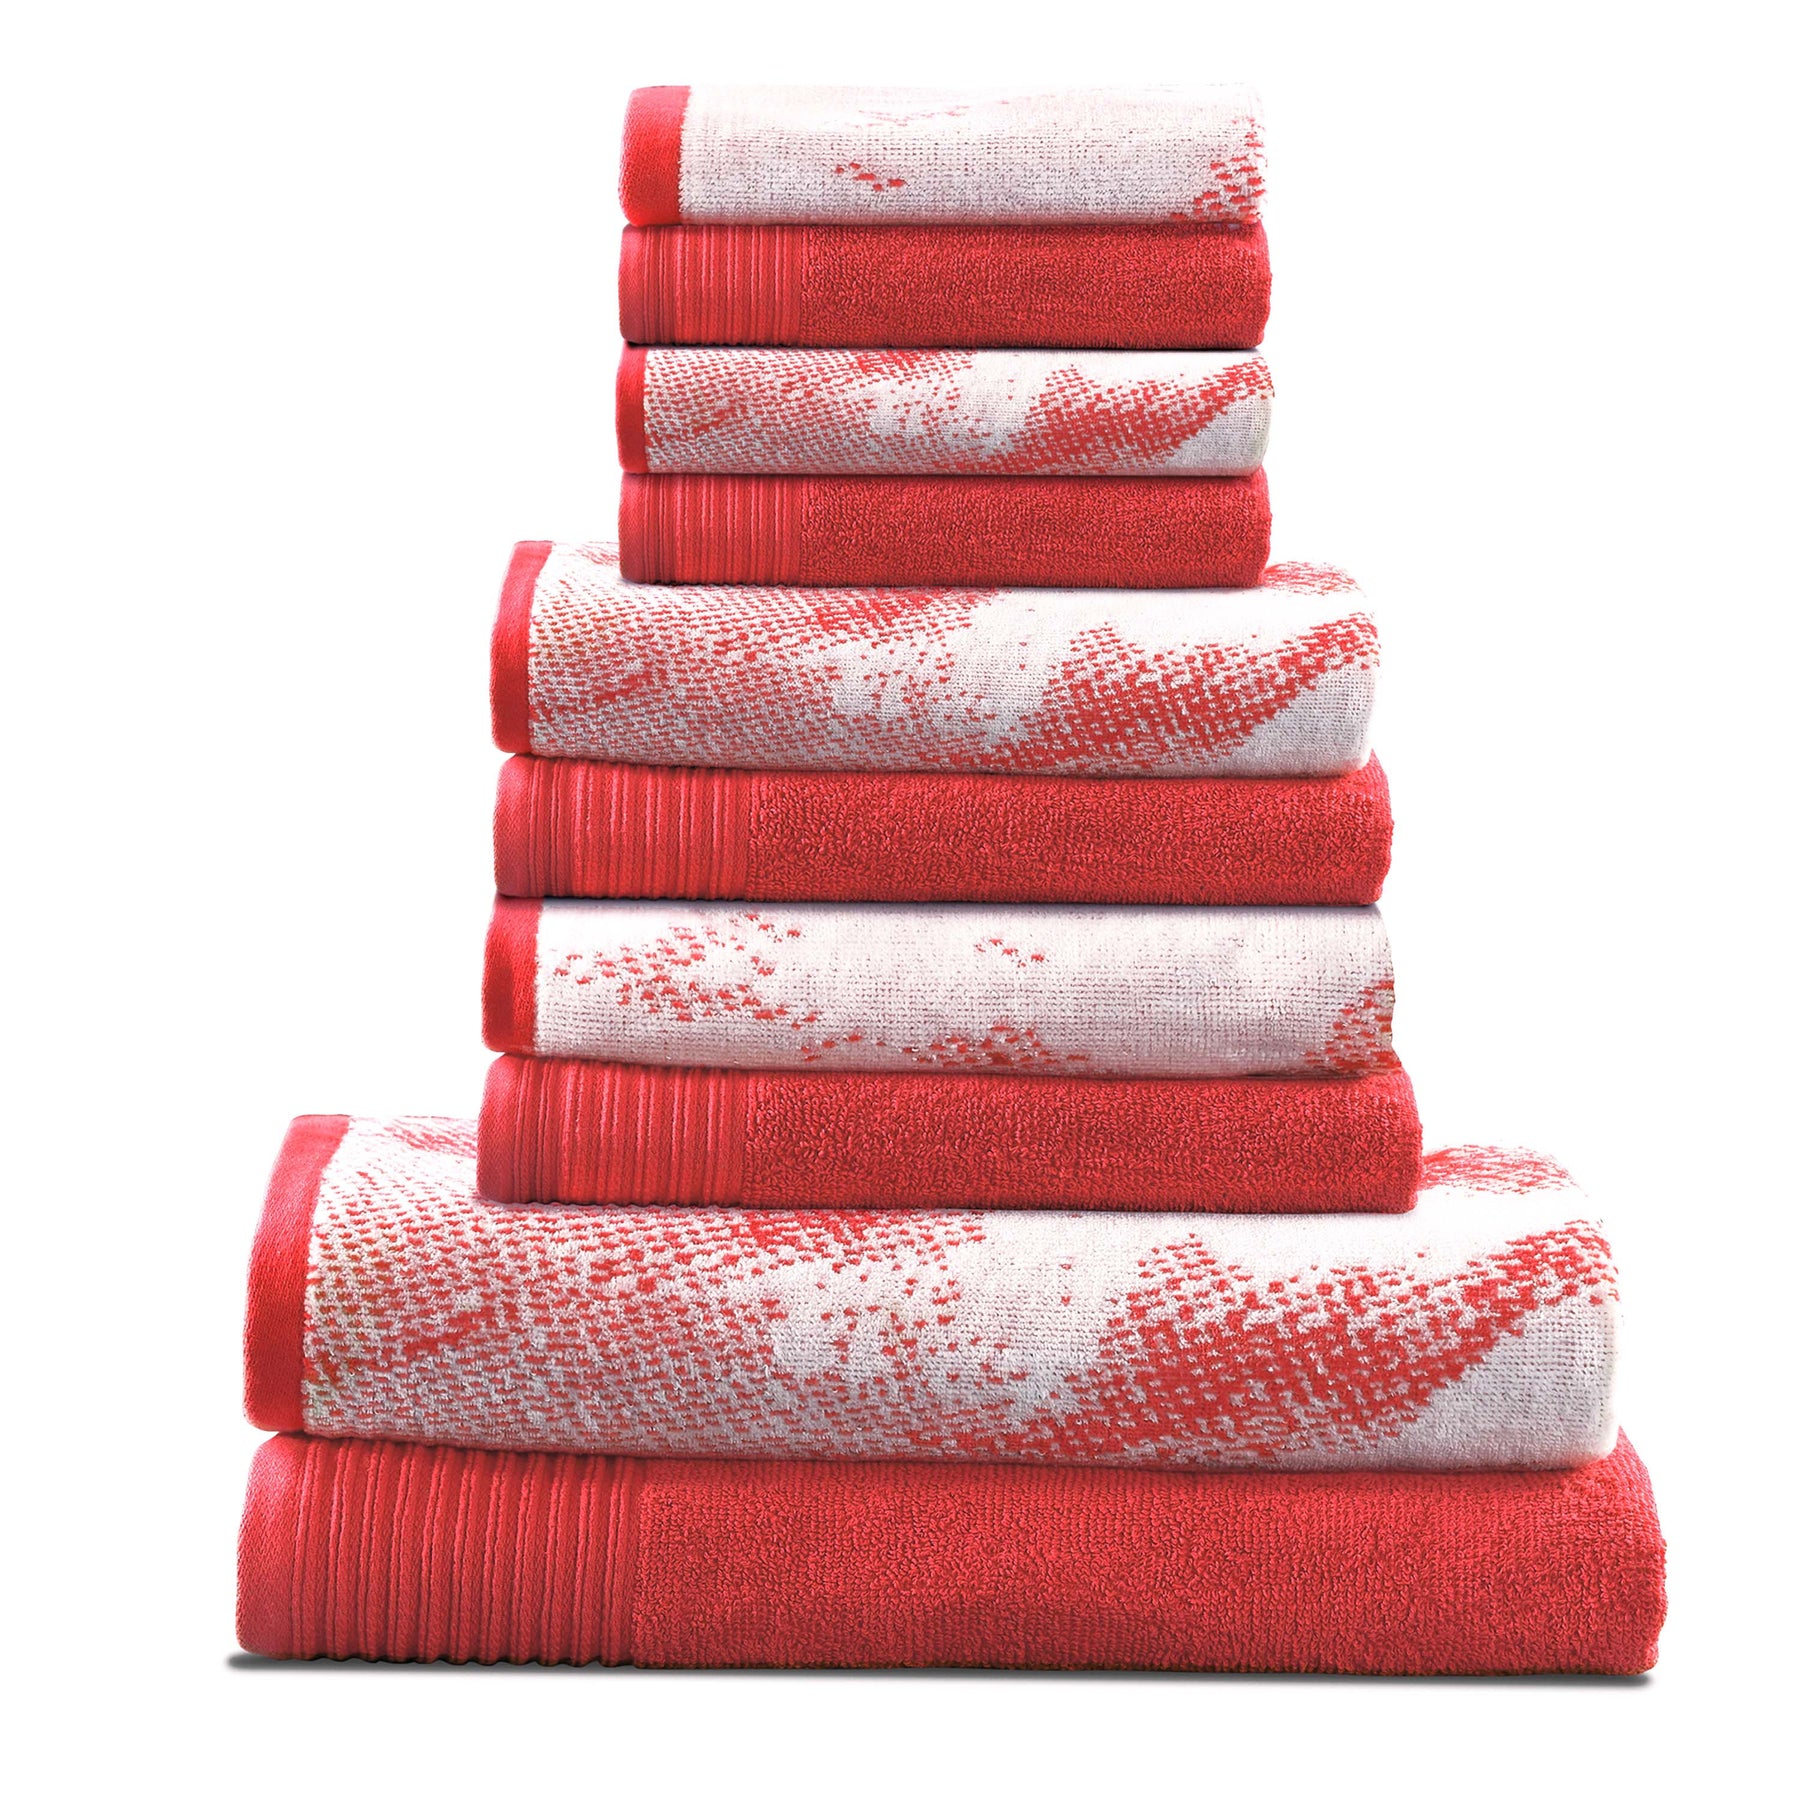 Cotton Marble and Solid Quick Dry 10 Piece Assorted Bathroom Towel Set